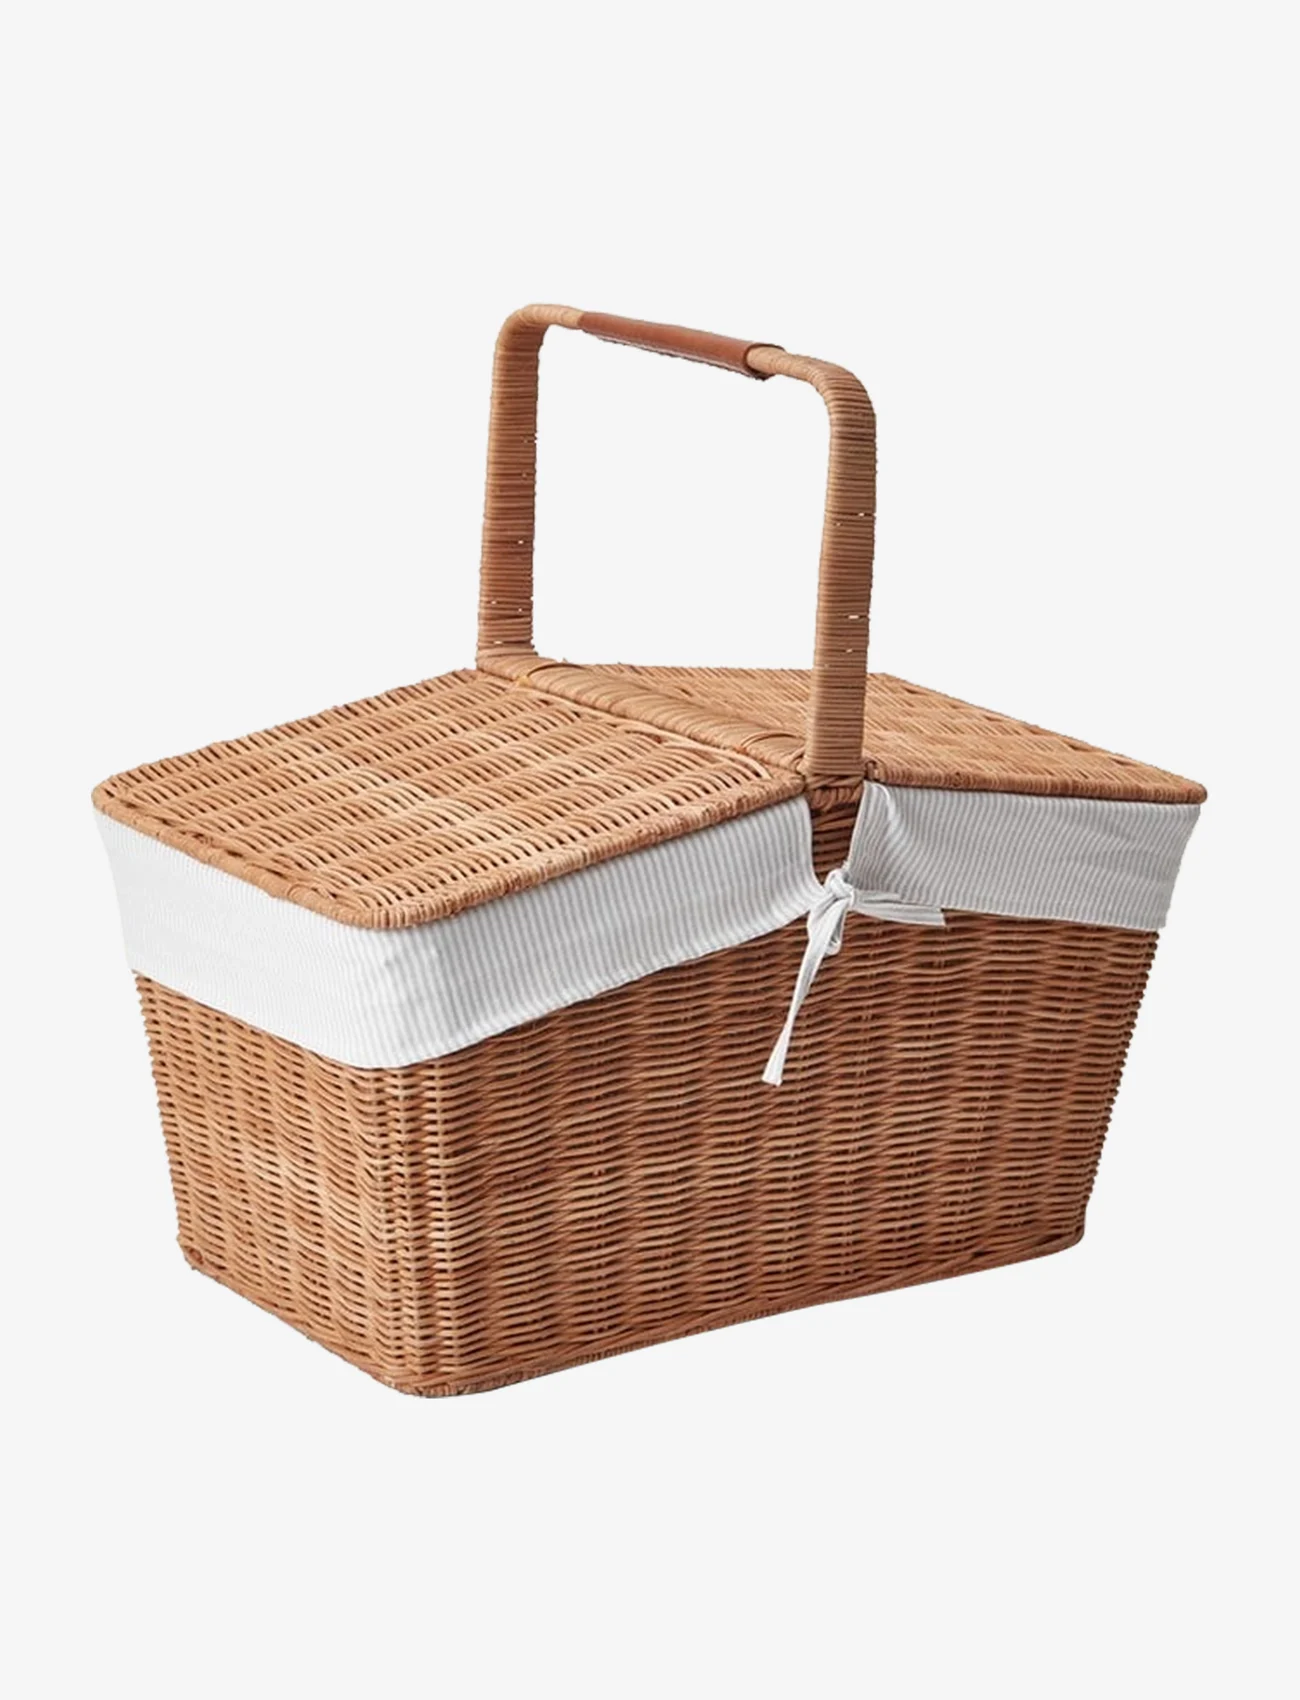 Lexington Home - Rattan Picnic Basket with Leather and Liner - natural - 1